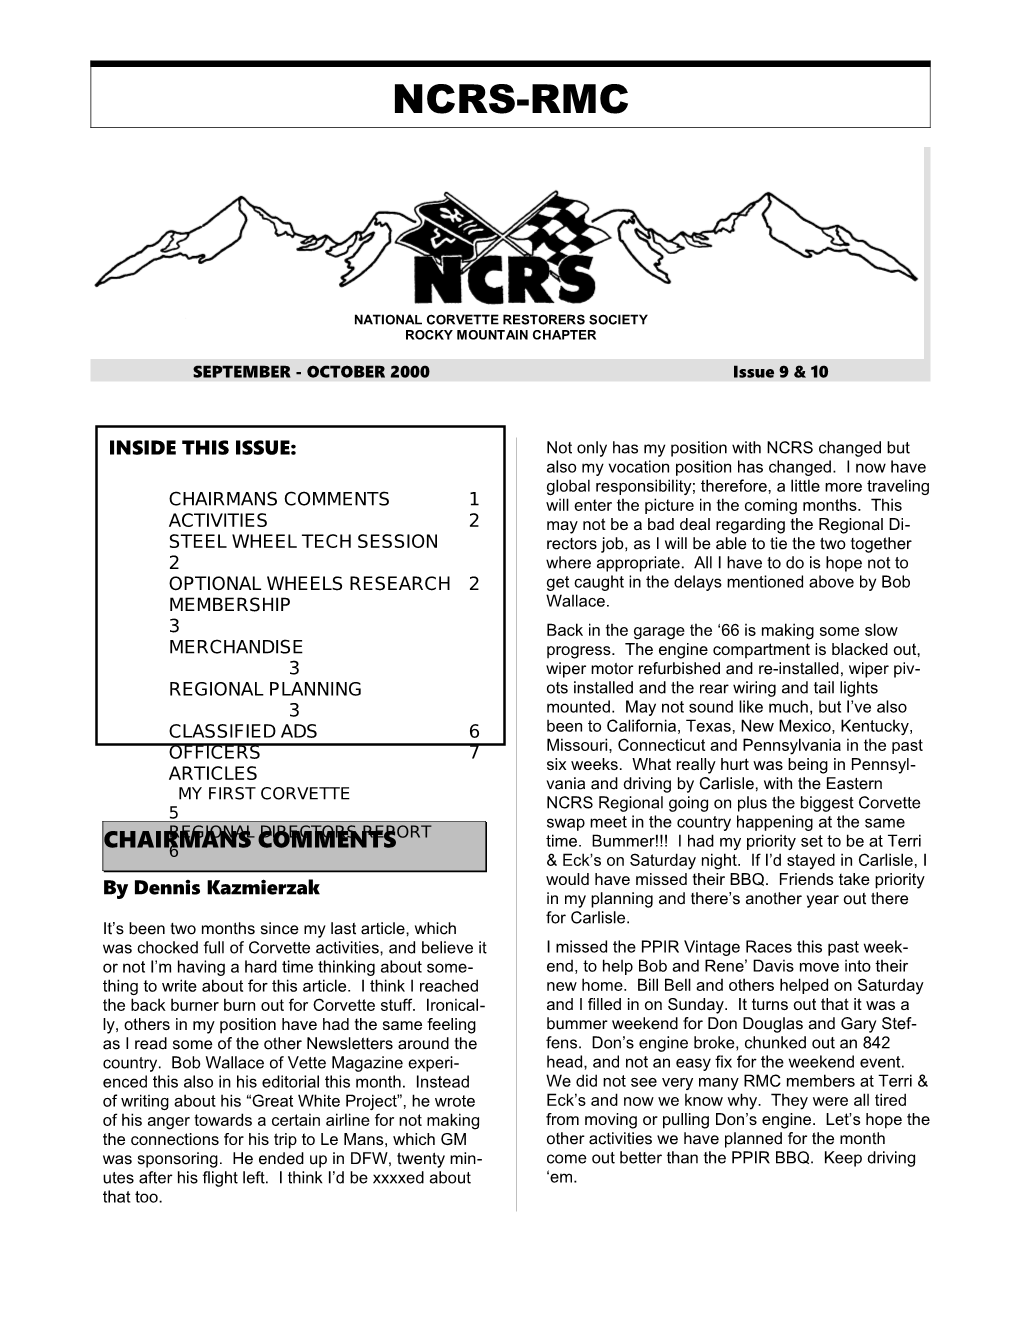 March 97 ROCKY MOUNTAIN CHAPTER Issue 3